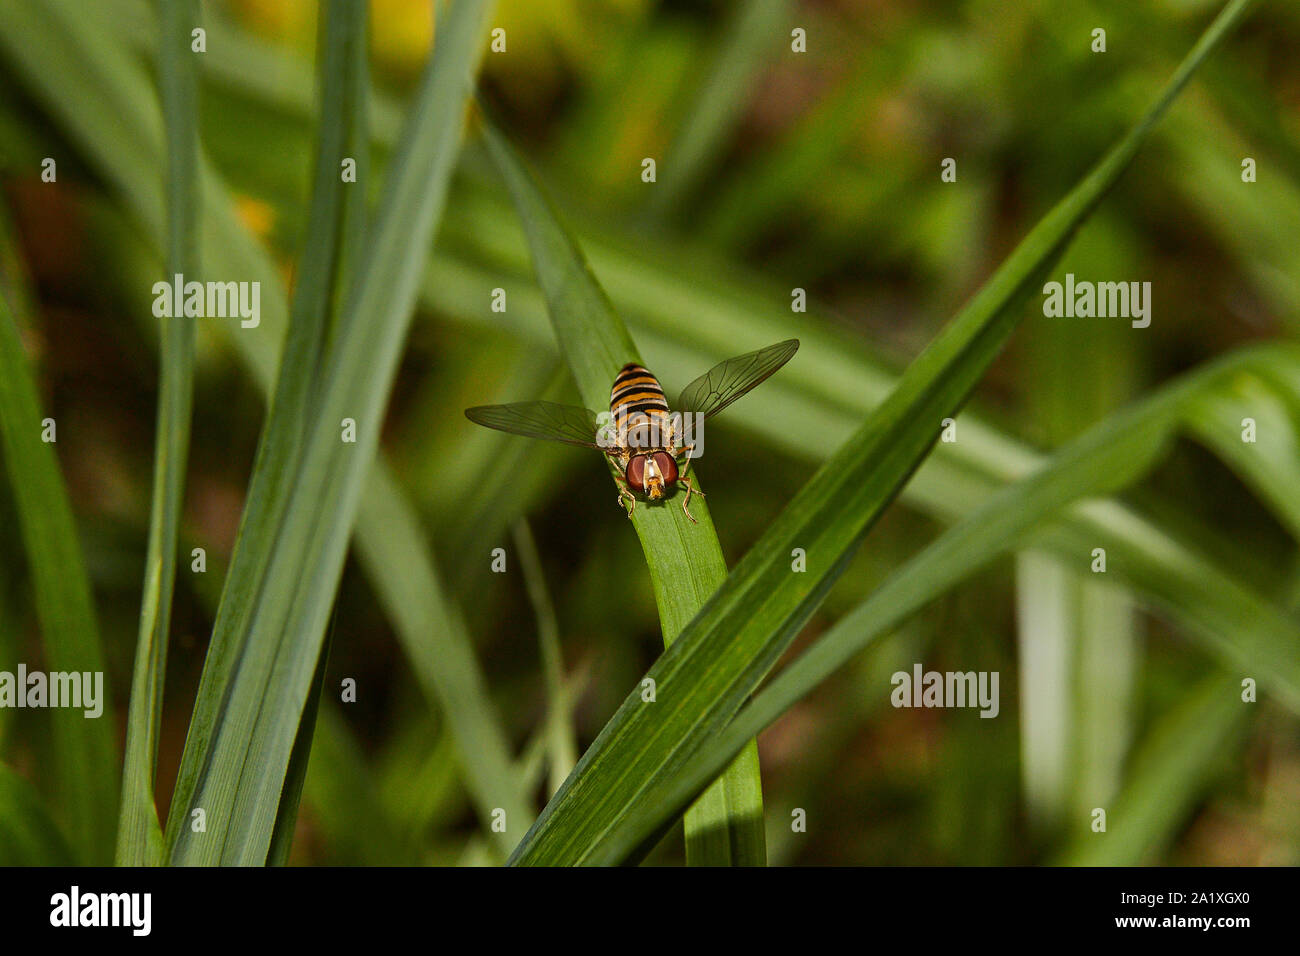 A macro image of a single Hoverfly (Syrphidae) sat on a green leaf Stock Photo